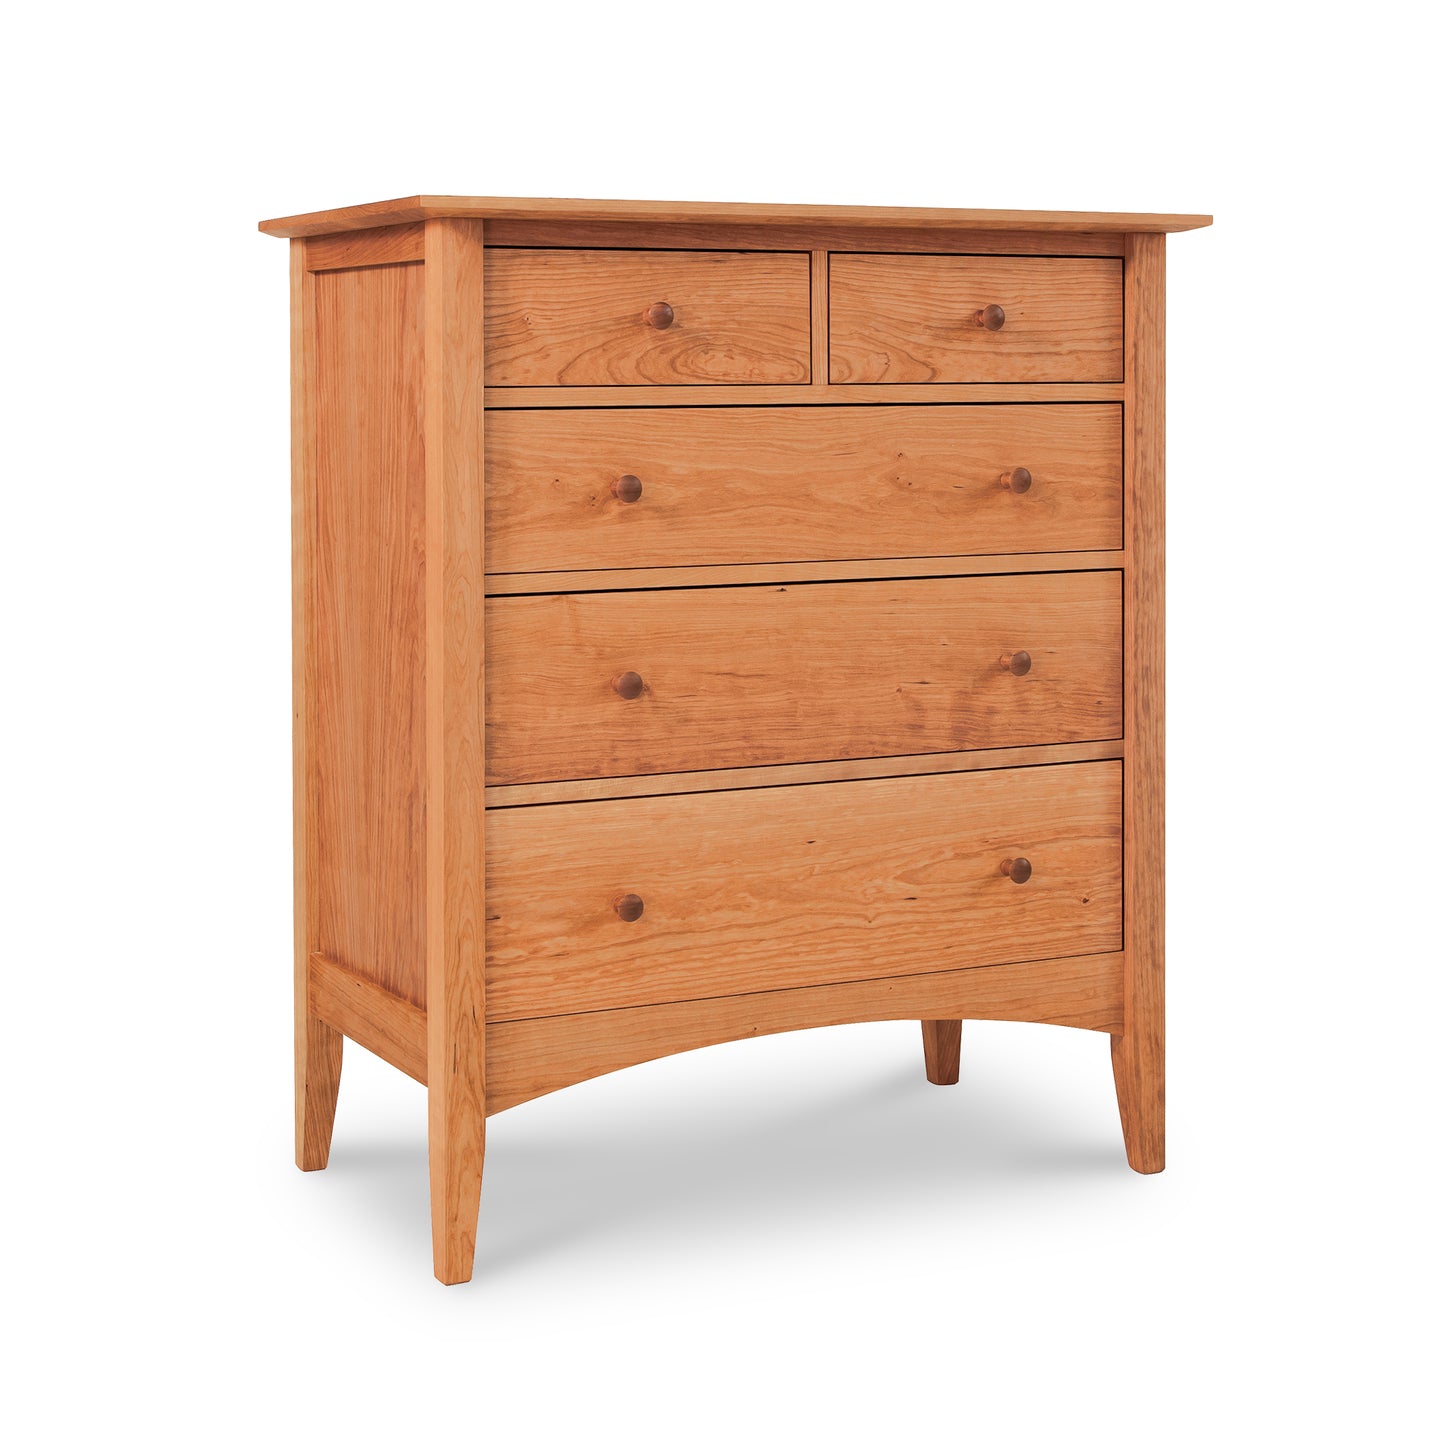 A Maple Corner Woodworks solid wood chest with four drawers, featuring a simple, traditional design and round handles, isolated on a white background.